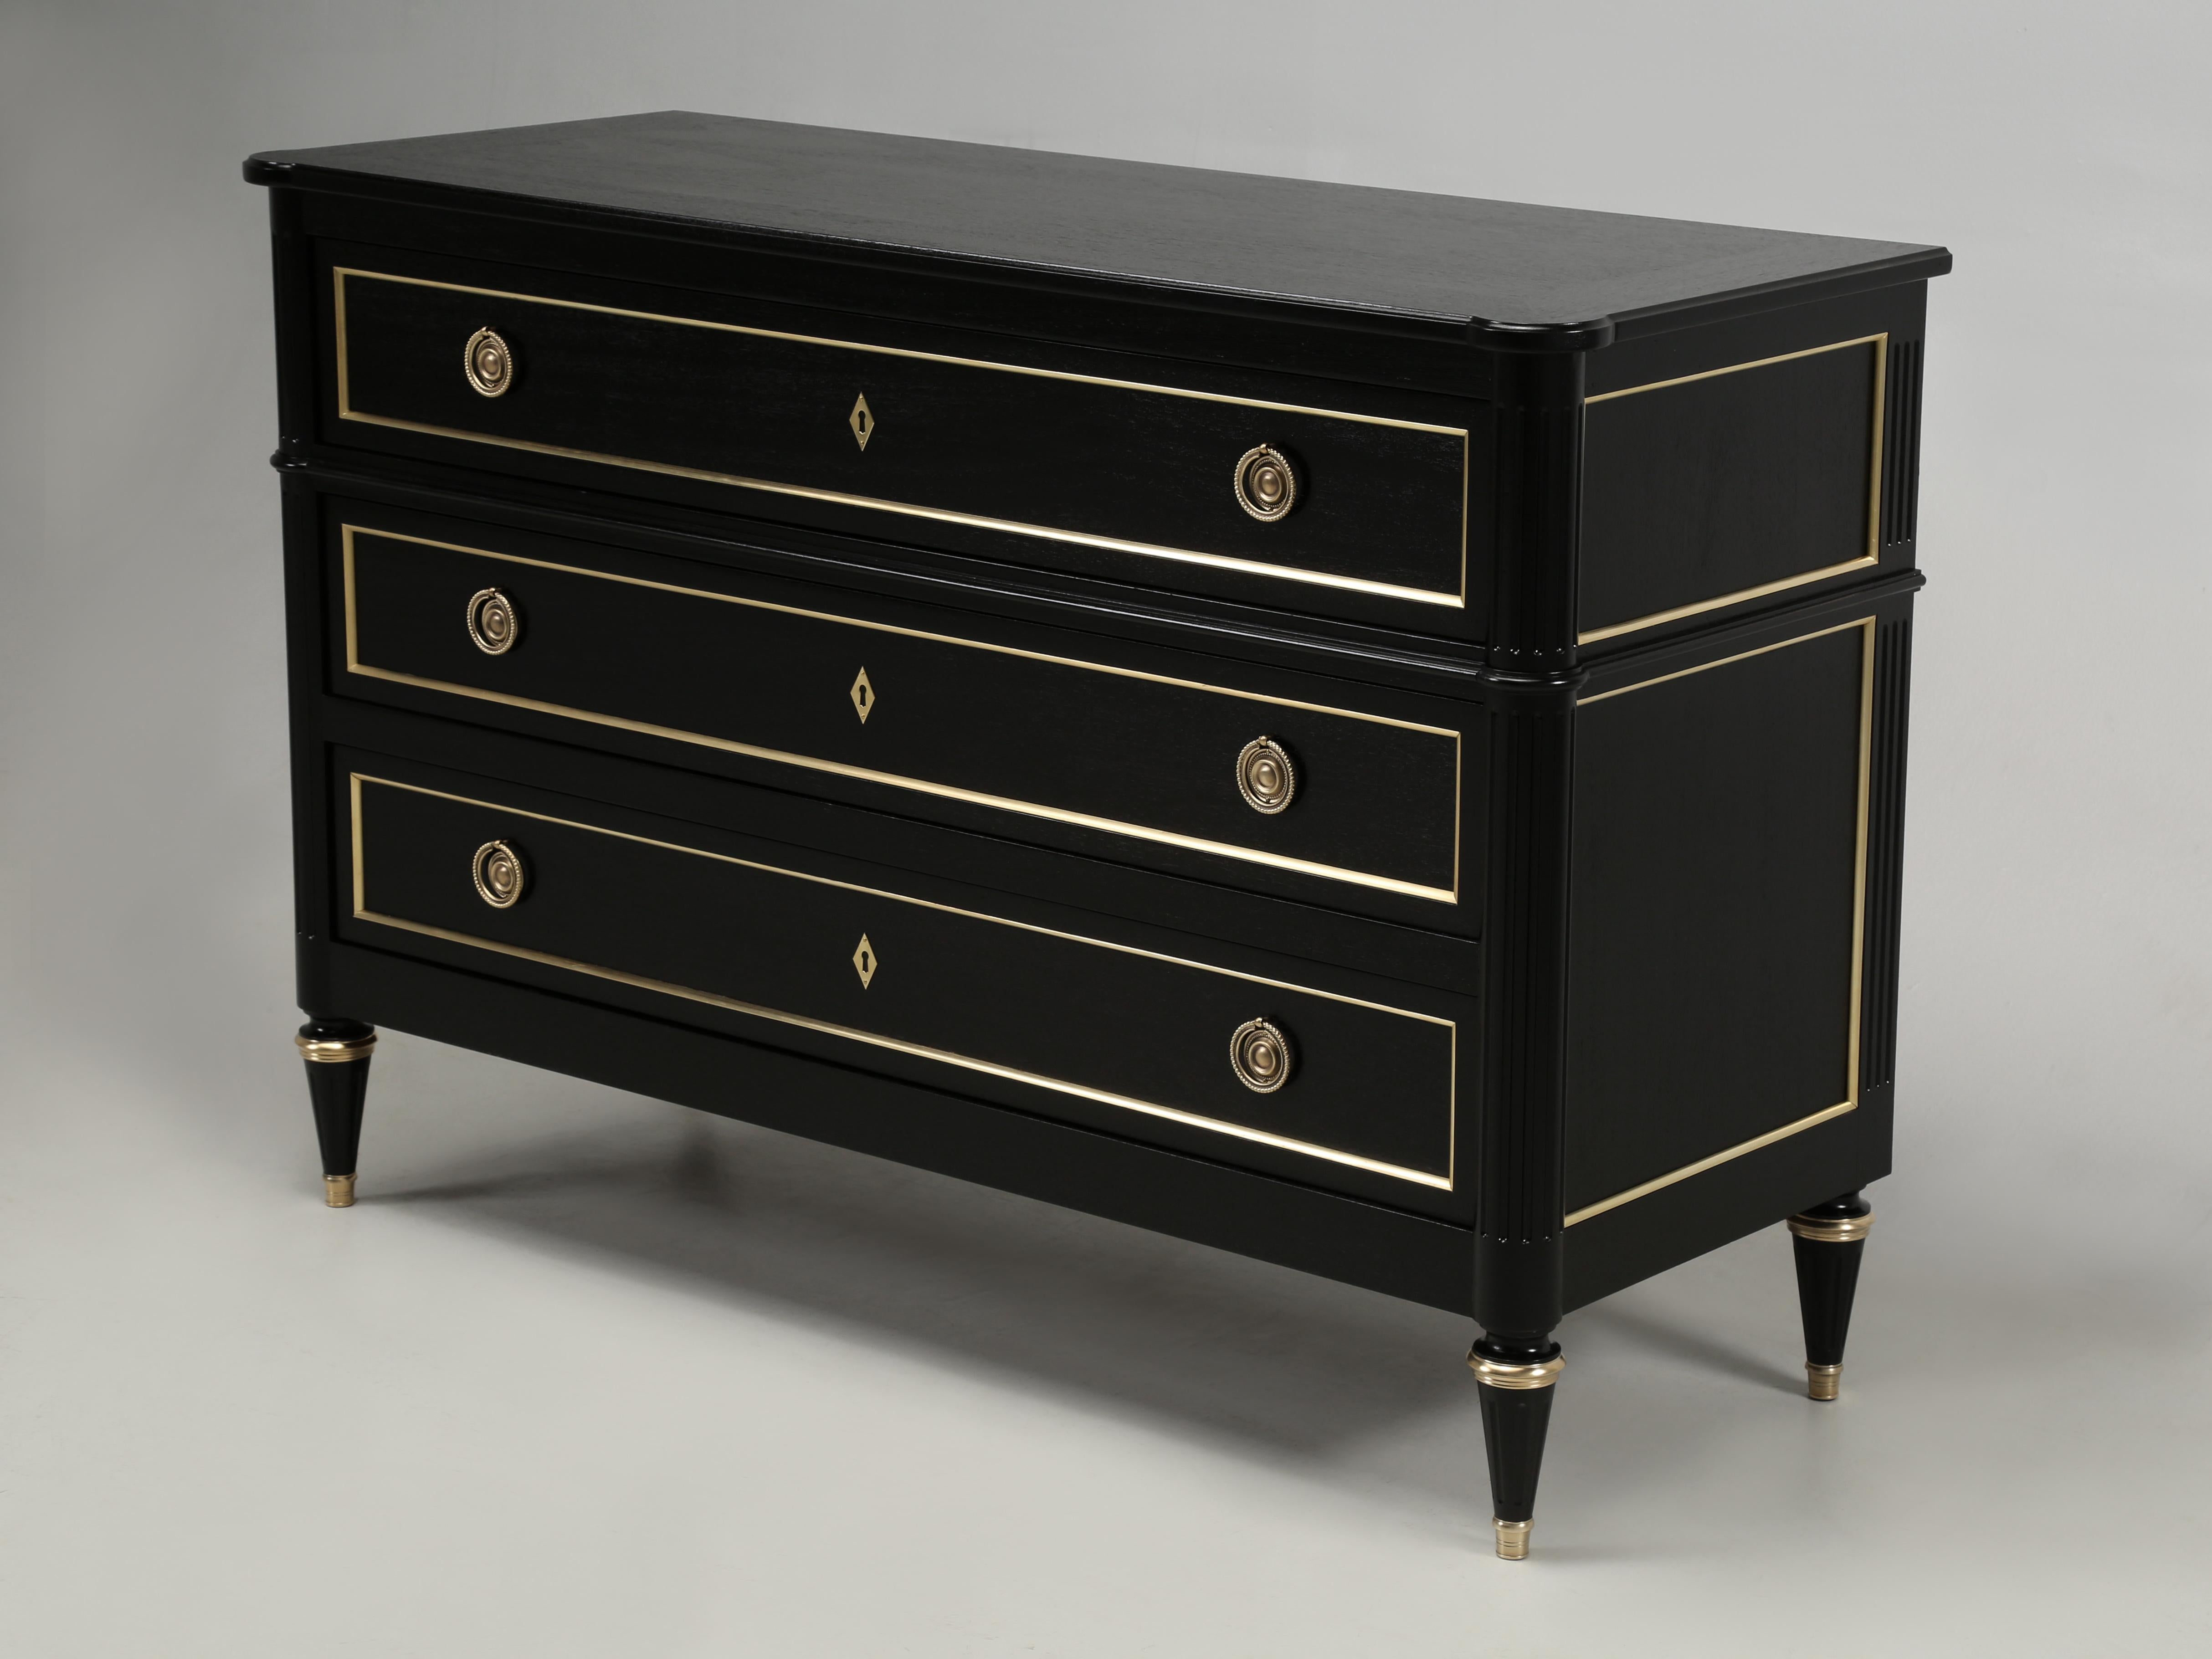 An Old Plank exclusive and part of our constantly expanding collection of Hand-Crated Furniture. Classic French Louis XVI Style Commode, Chest of Drawers or Dresser, pick your preference, for they all mean the same. Each Louis XVI Style Commode is